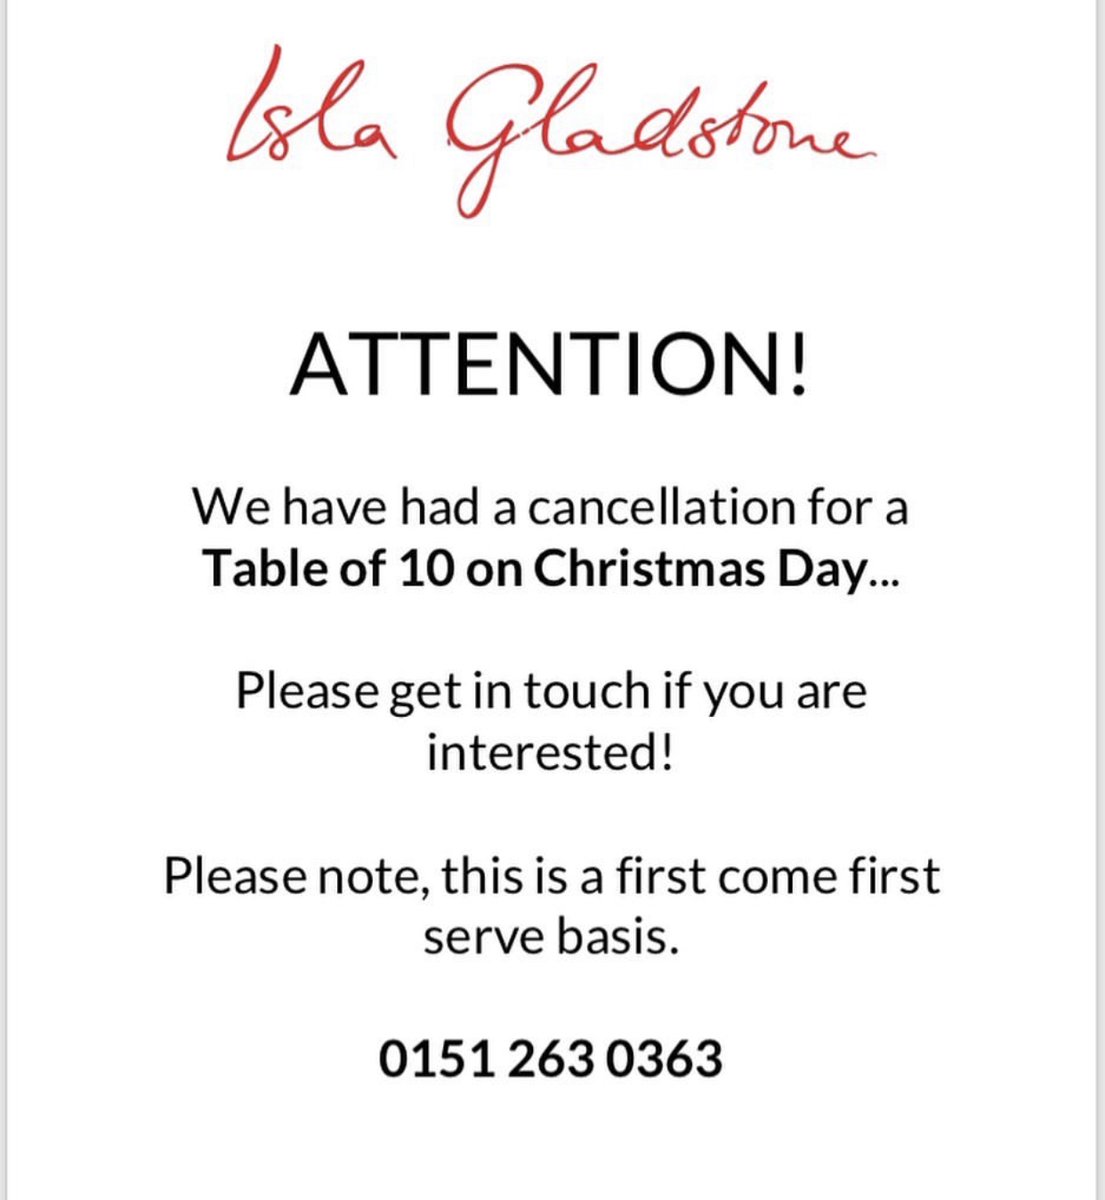 We have had a cancellation for a Table of 10 on Christmas Day ! Please contact the events team on 0151 263 0363 if interested #christmasday #theislagladstone #stanleypark